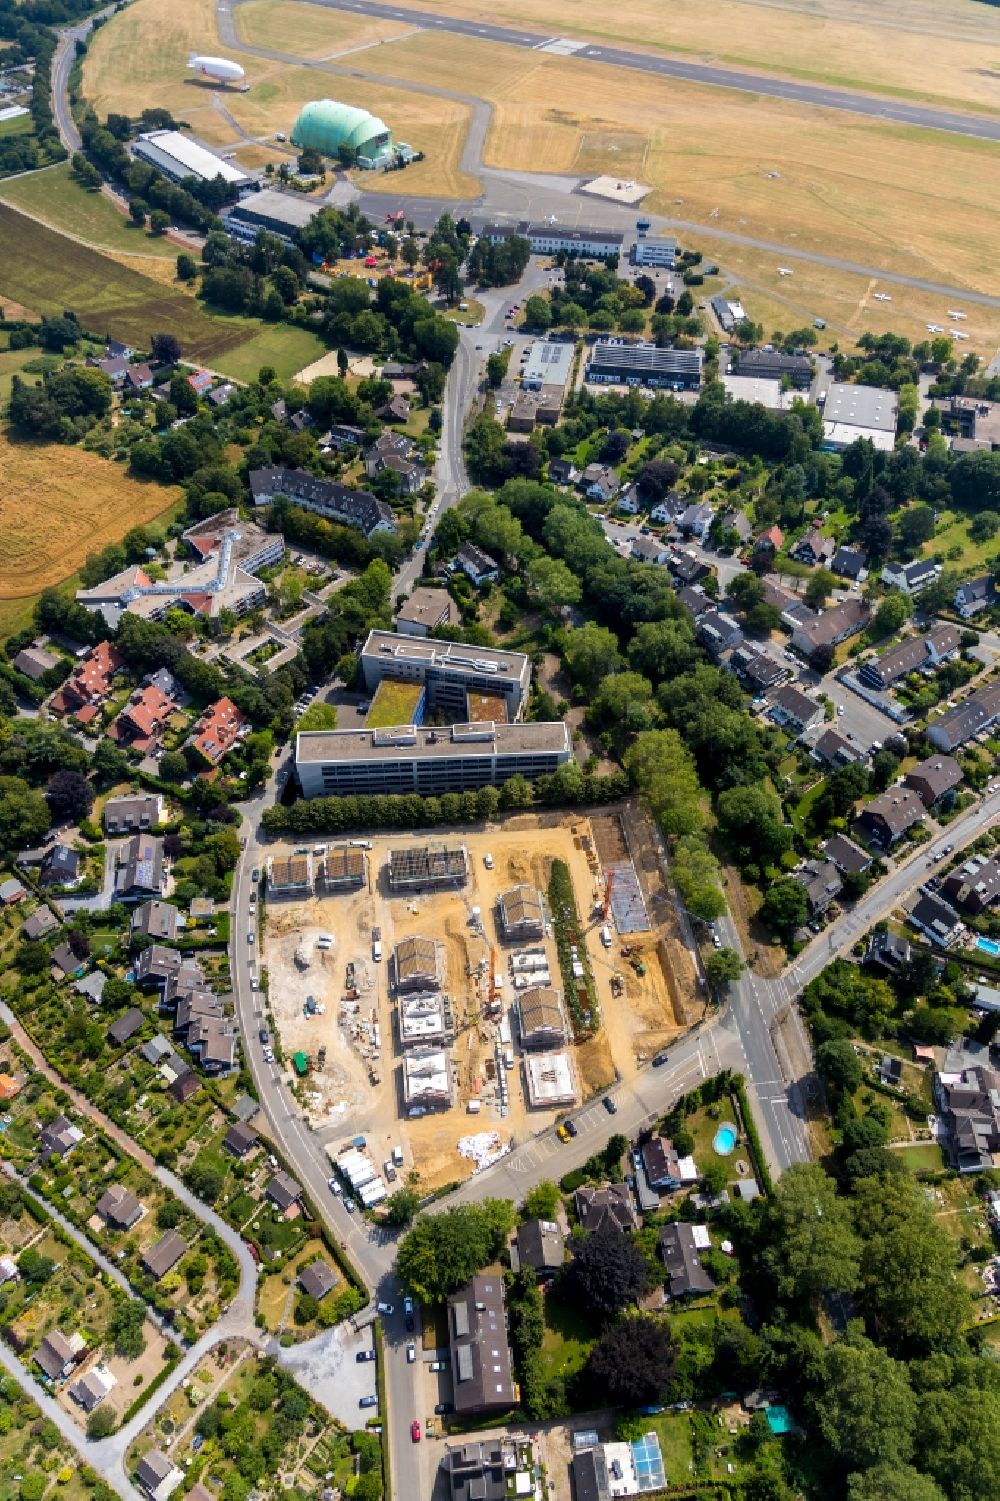 Aerial photograph Mülheim an der Ruhr - Construction sites for new construction residential area of detached housing estate planned by LA CITTA Stadtplanung and implemented by BPD Immobilienentwicklung GmbH between Zeppelinstrasse and Windmuehlenstrasse in Muelheim on the Ruhr in the state North Rhine-Westphalia, Germany